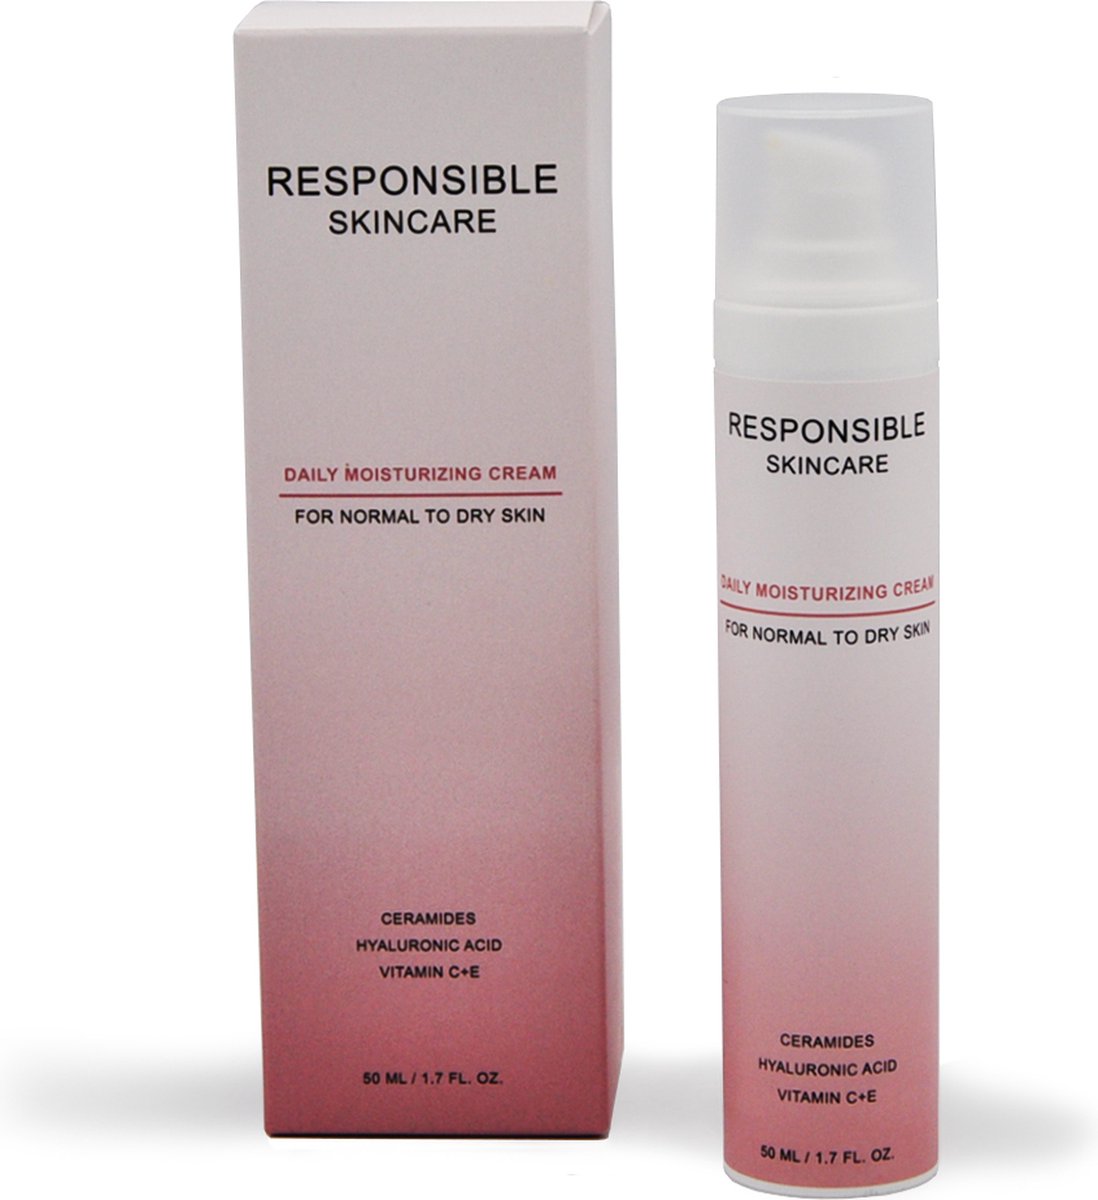 Responsible Skincare - Daily Moisturizing Cream - For Normal to Dry Skin - 50 ml